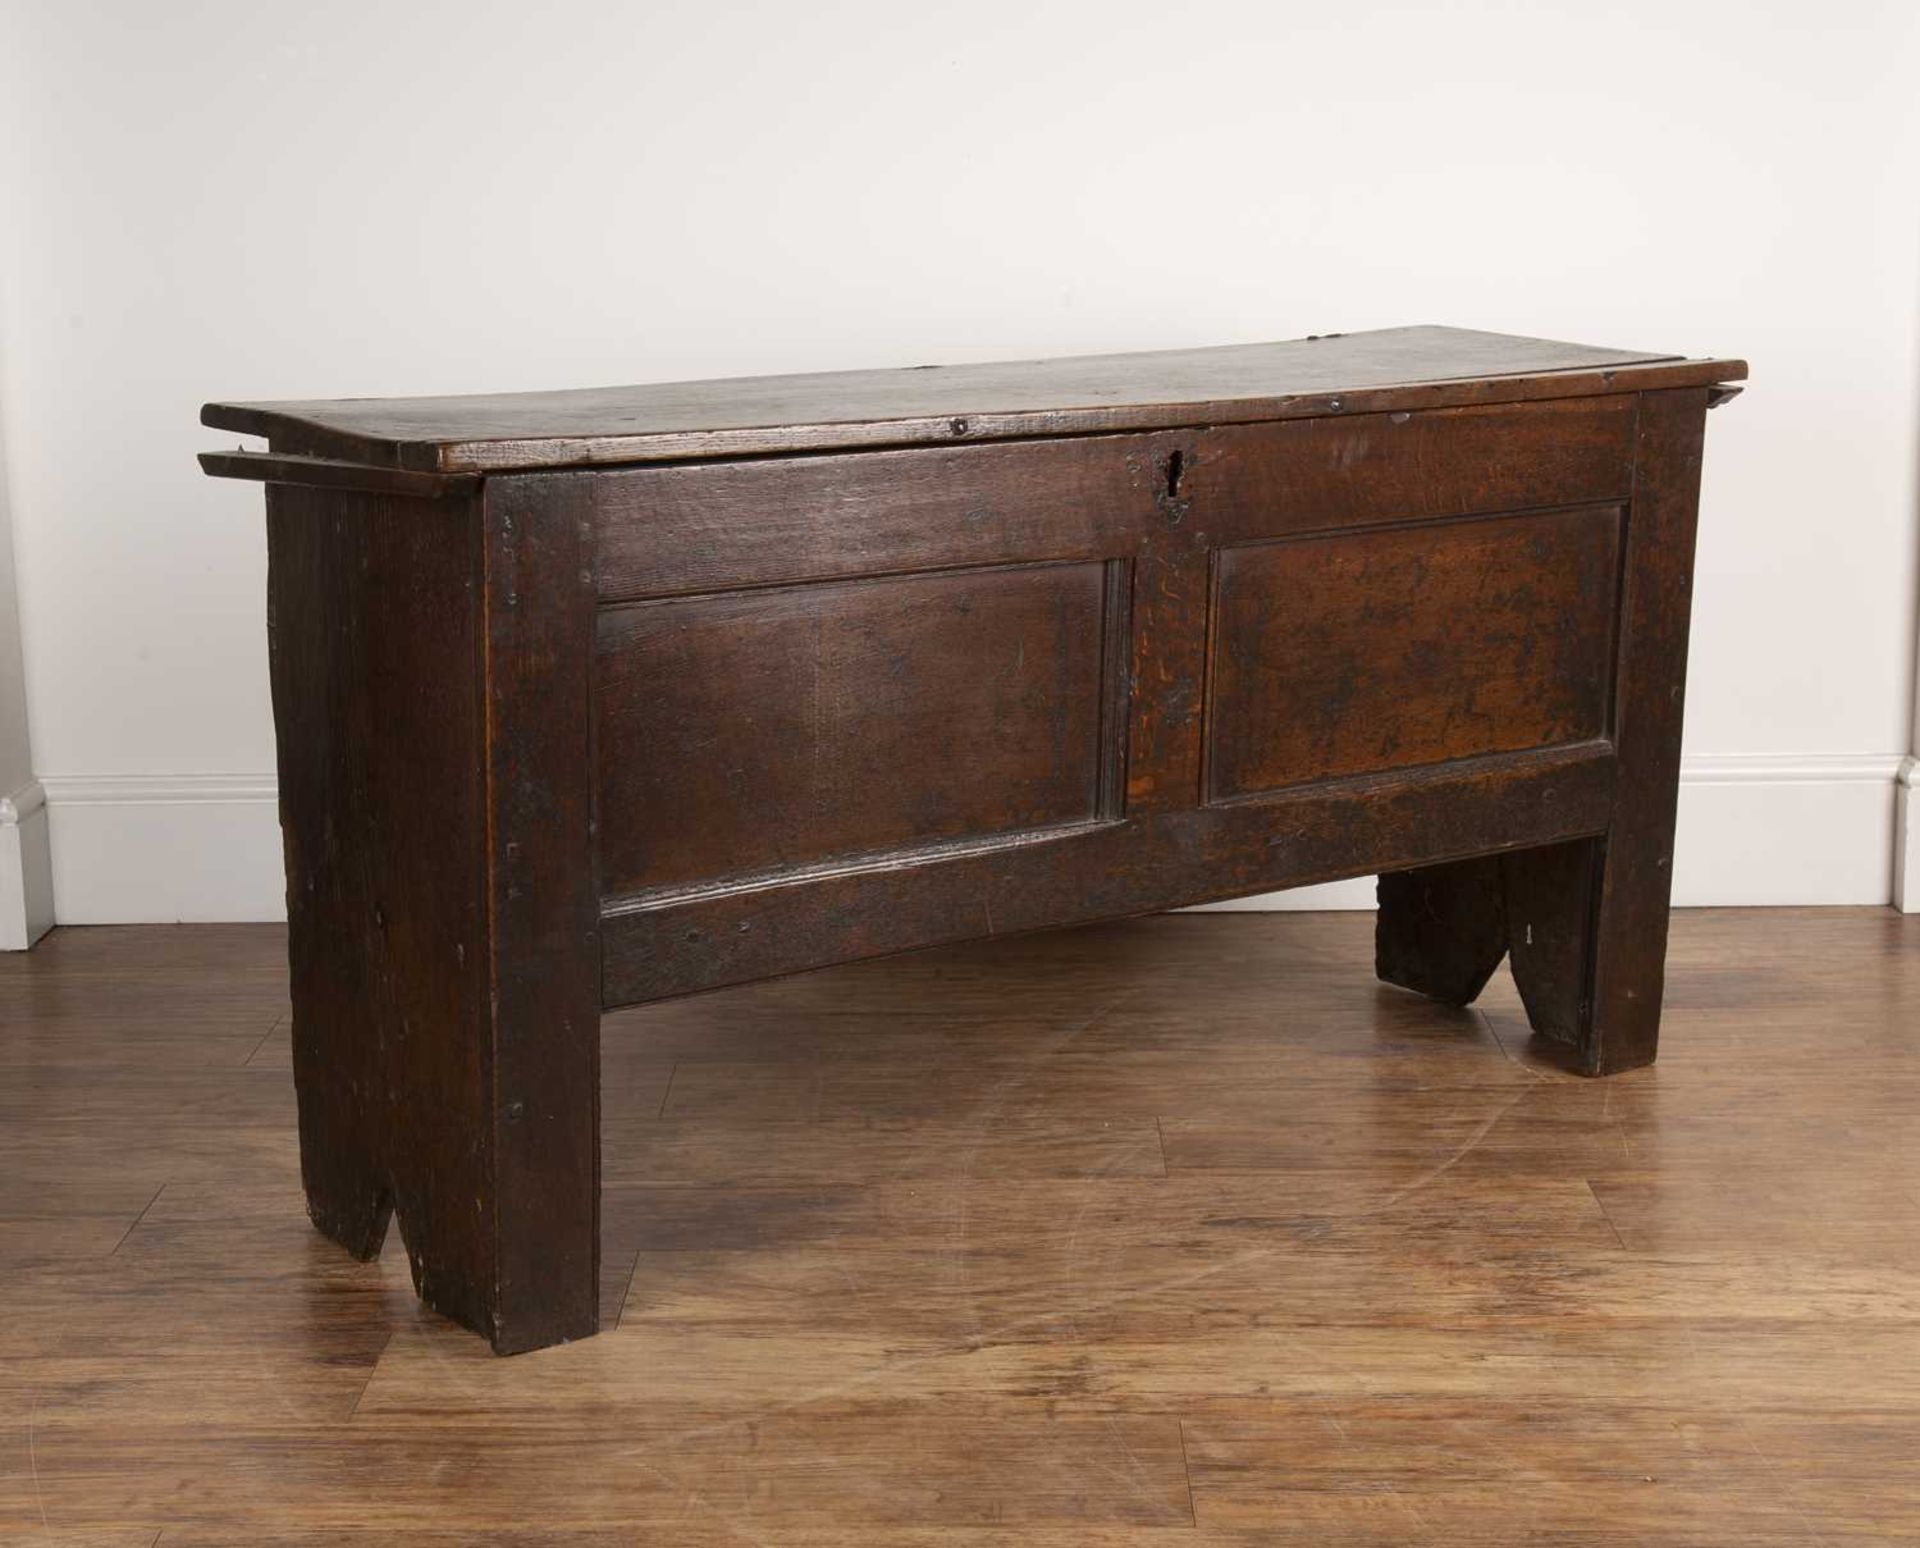 Oak coffer late 17th Century, with a plain double panel front and with iron hinges, 132.5cm wide x - Image 2 of 5